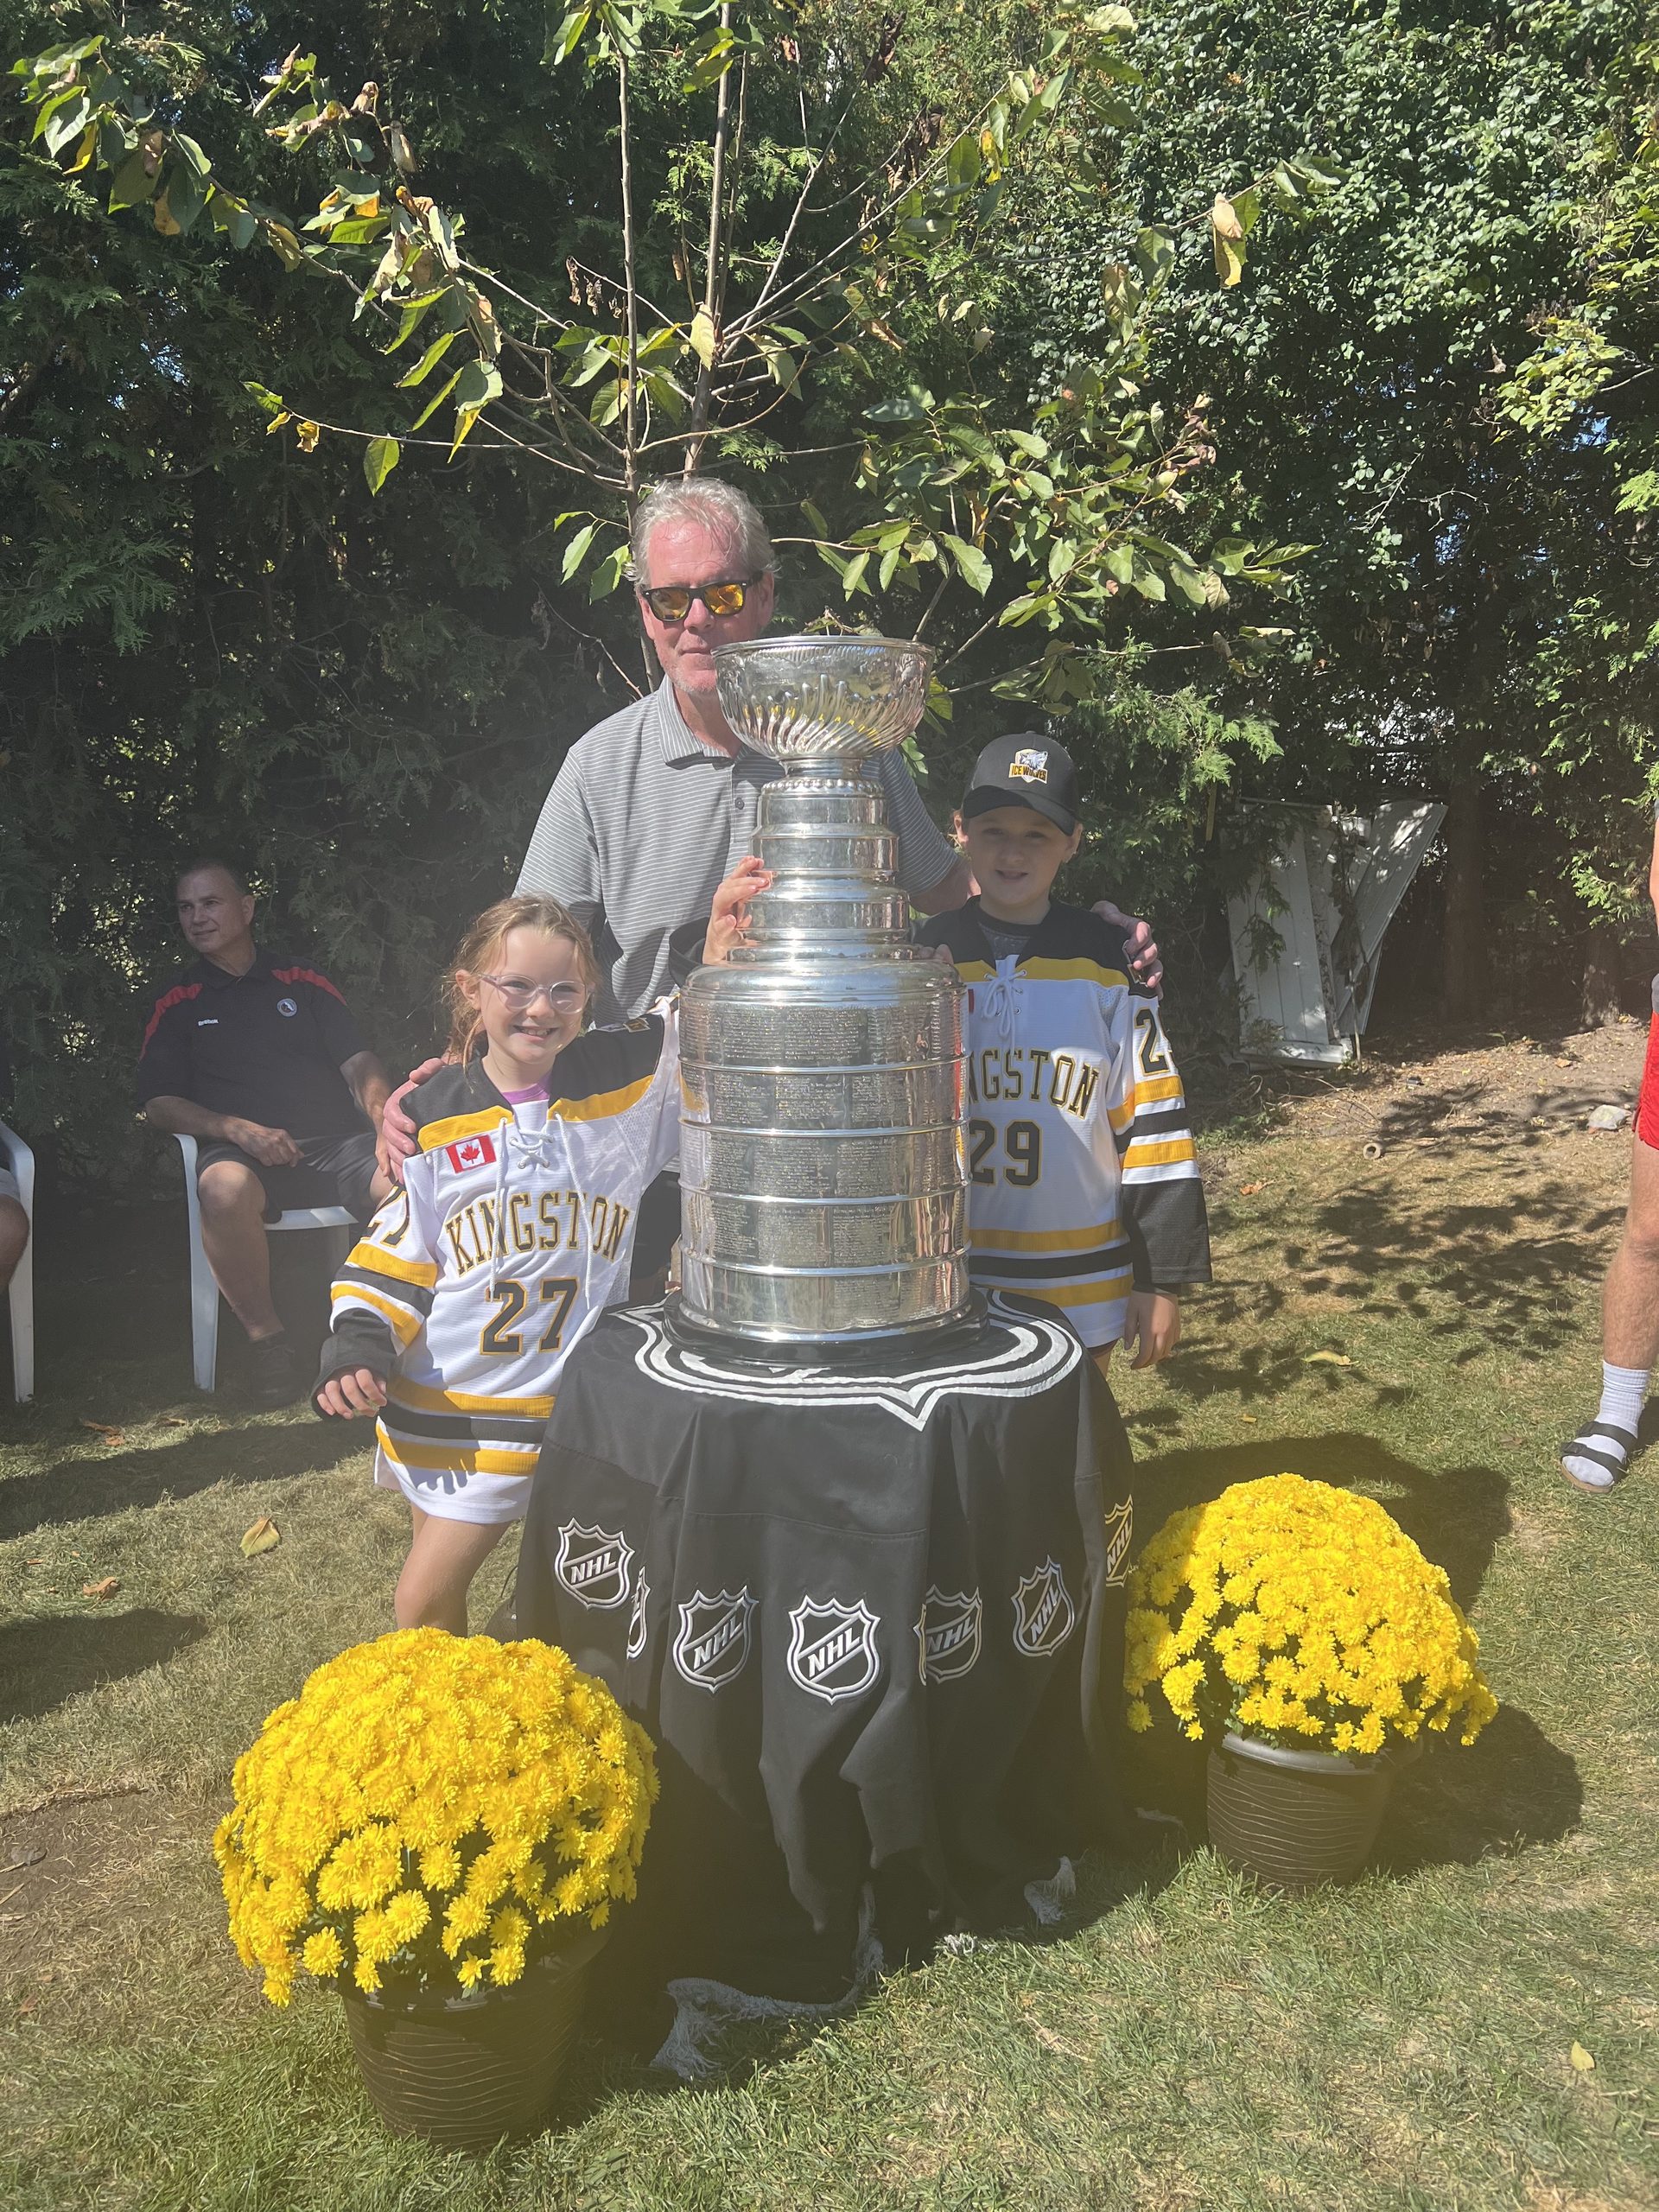 Kent with members of Greater Kingston Girls Hockey Ice Wolves at the Stanley Cup celebration 